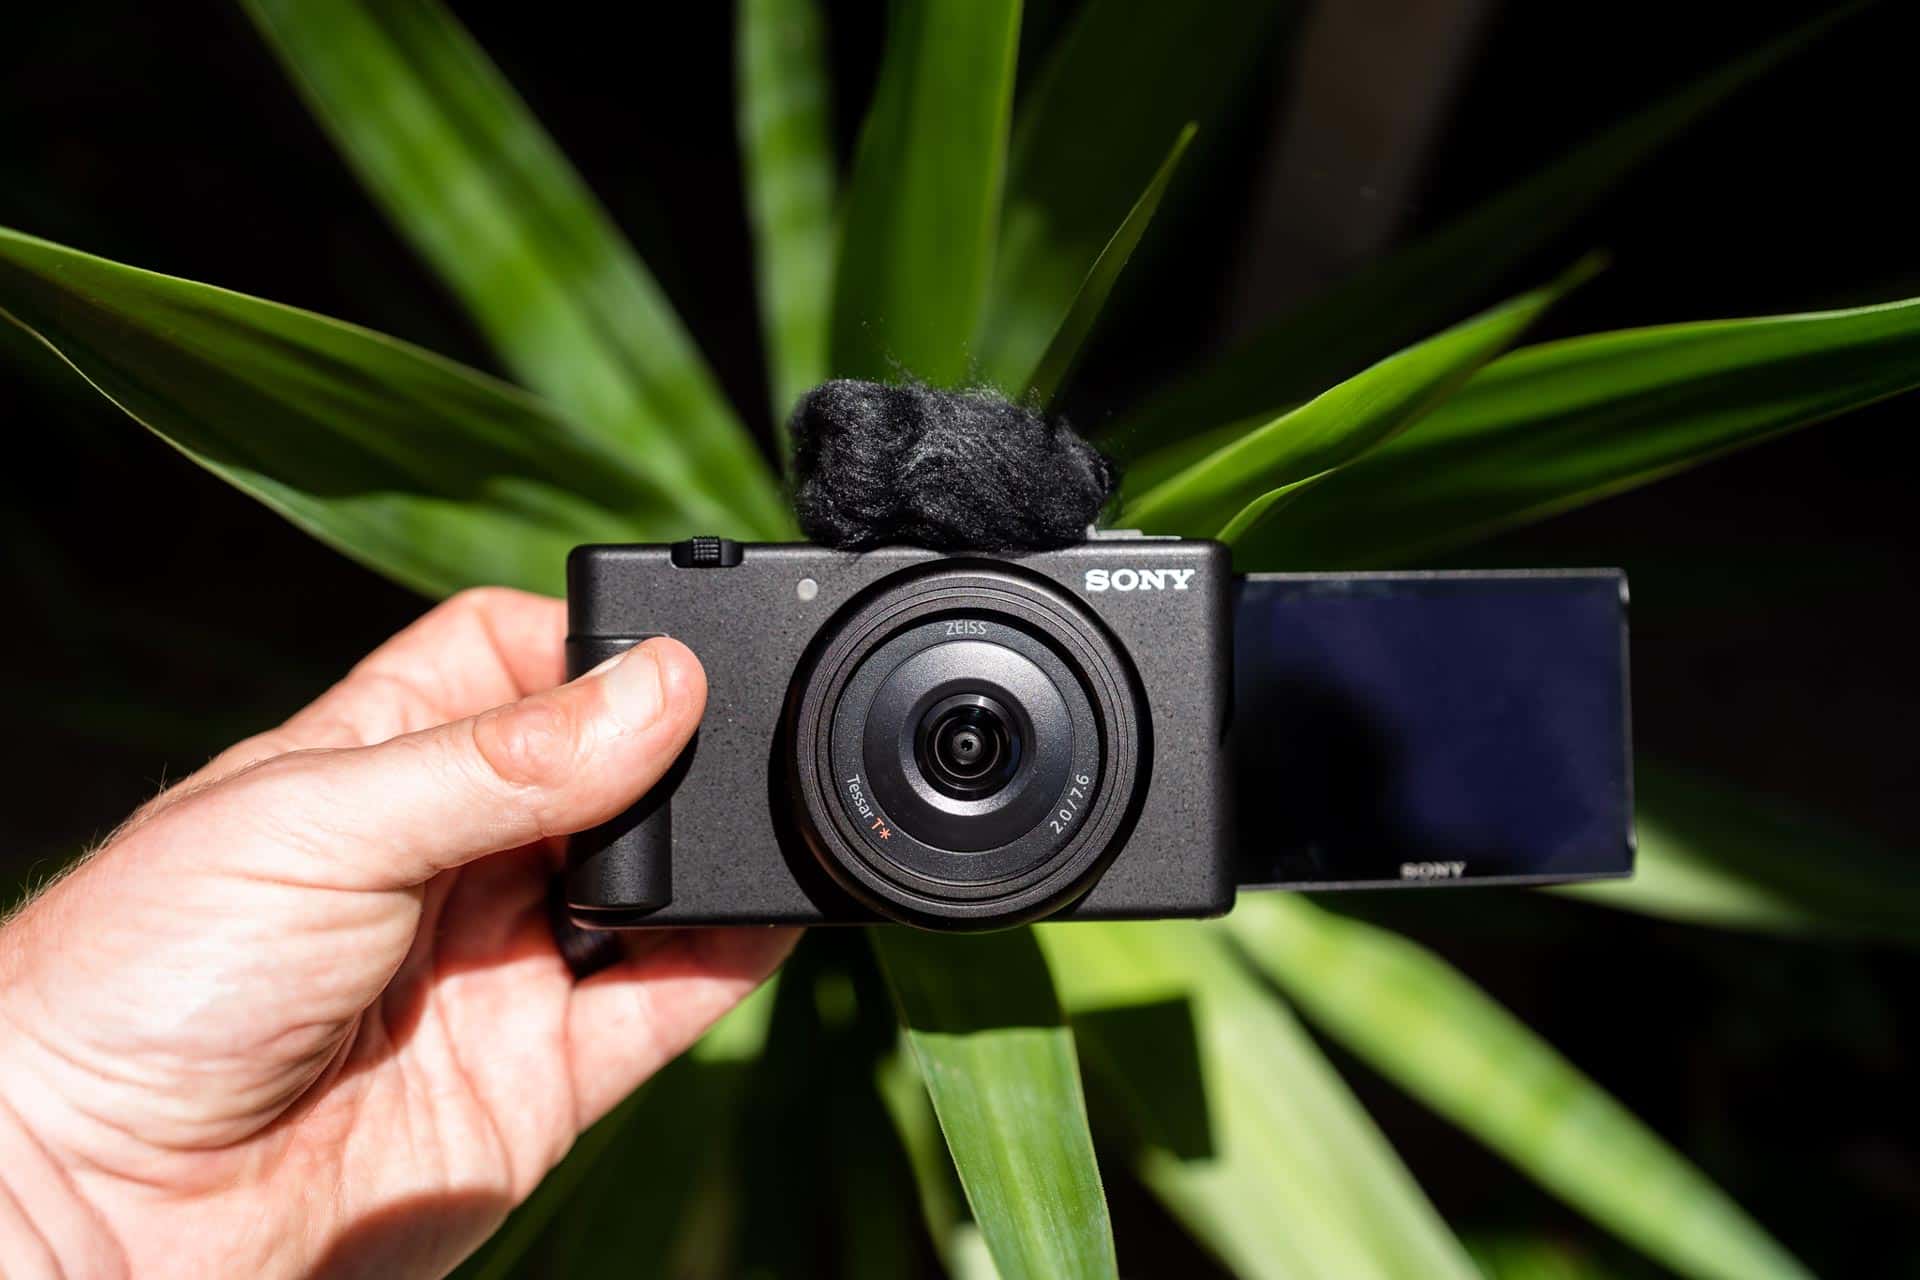 Sony ZV-1F Review - The Best Entry-Level Vlogging Camera?